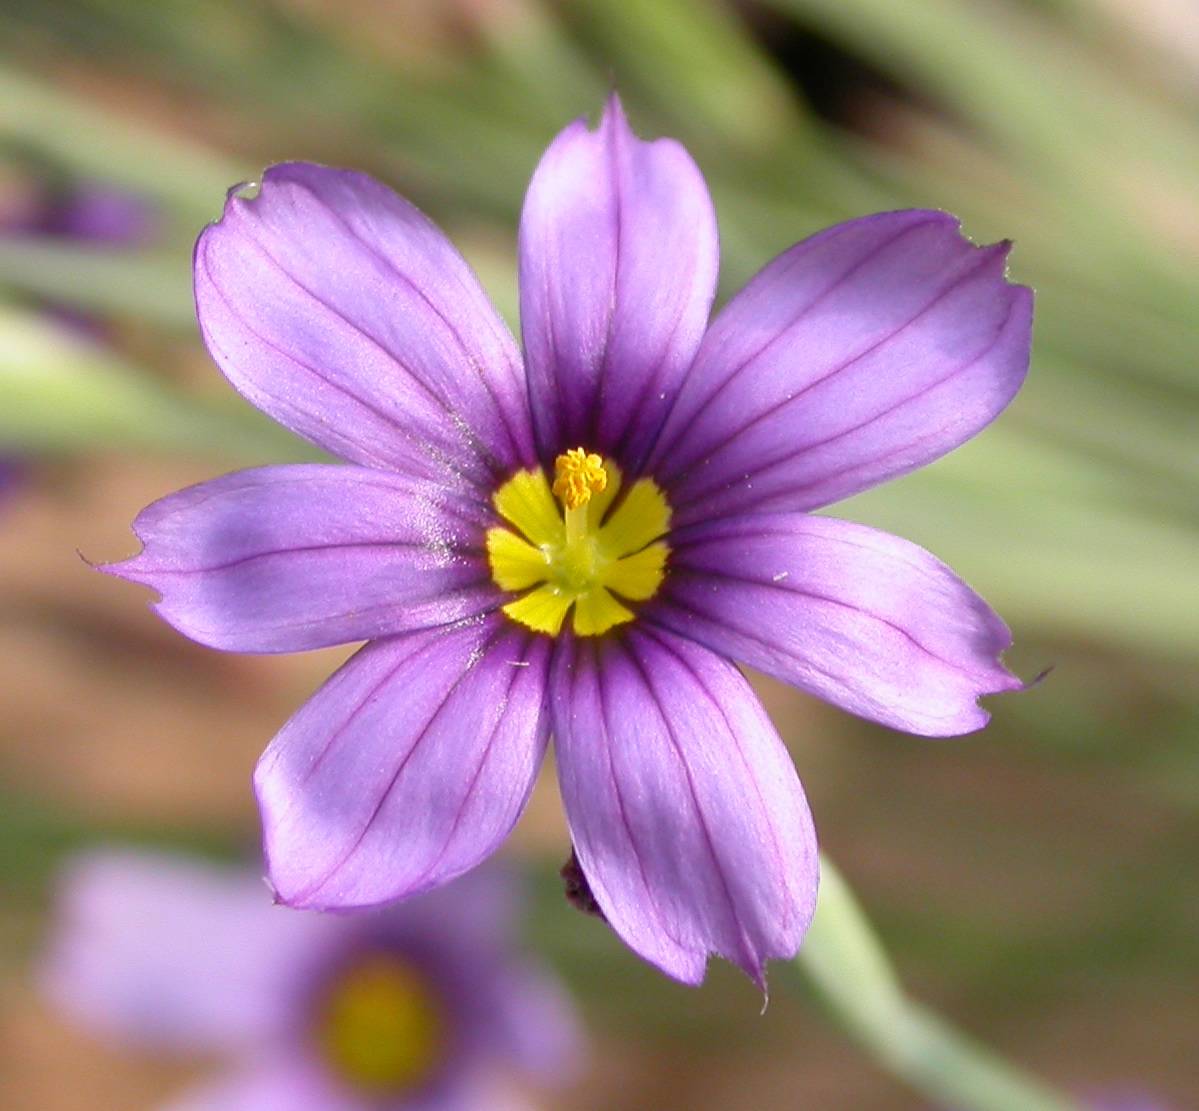 purple flowers with yellow center, stigma and yellow style with light-green stem